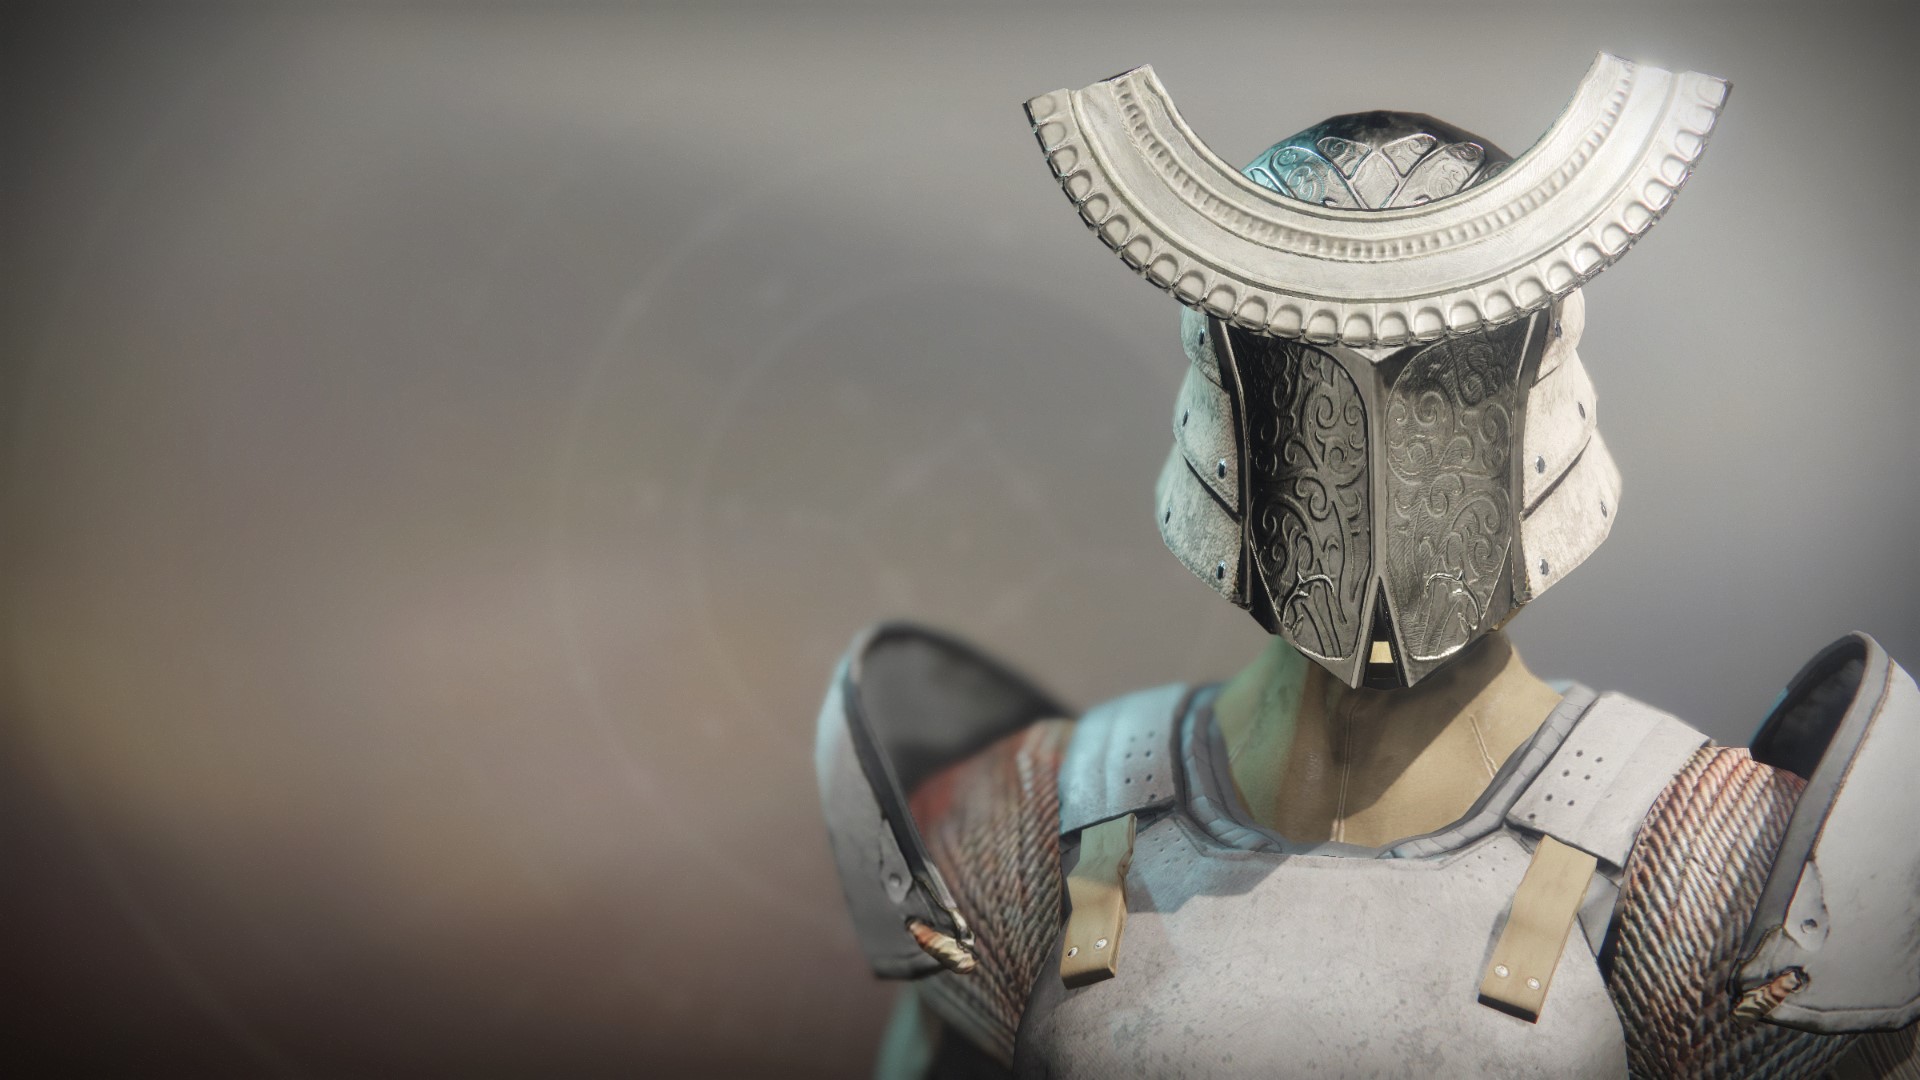 An in-game render of the Iron Pledge Ornament.